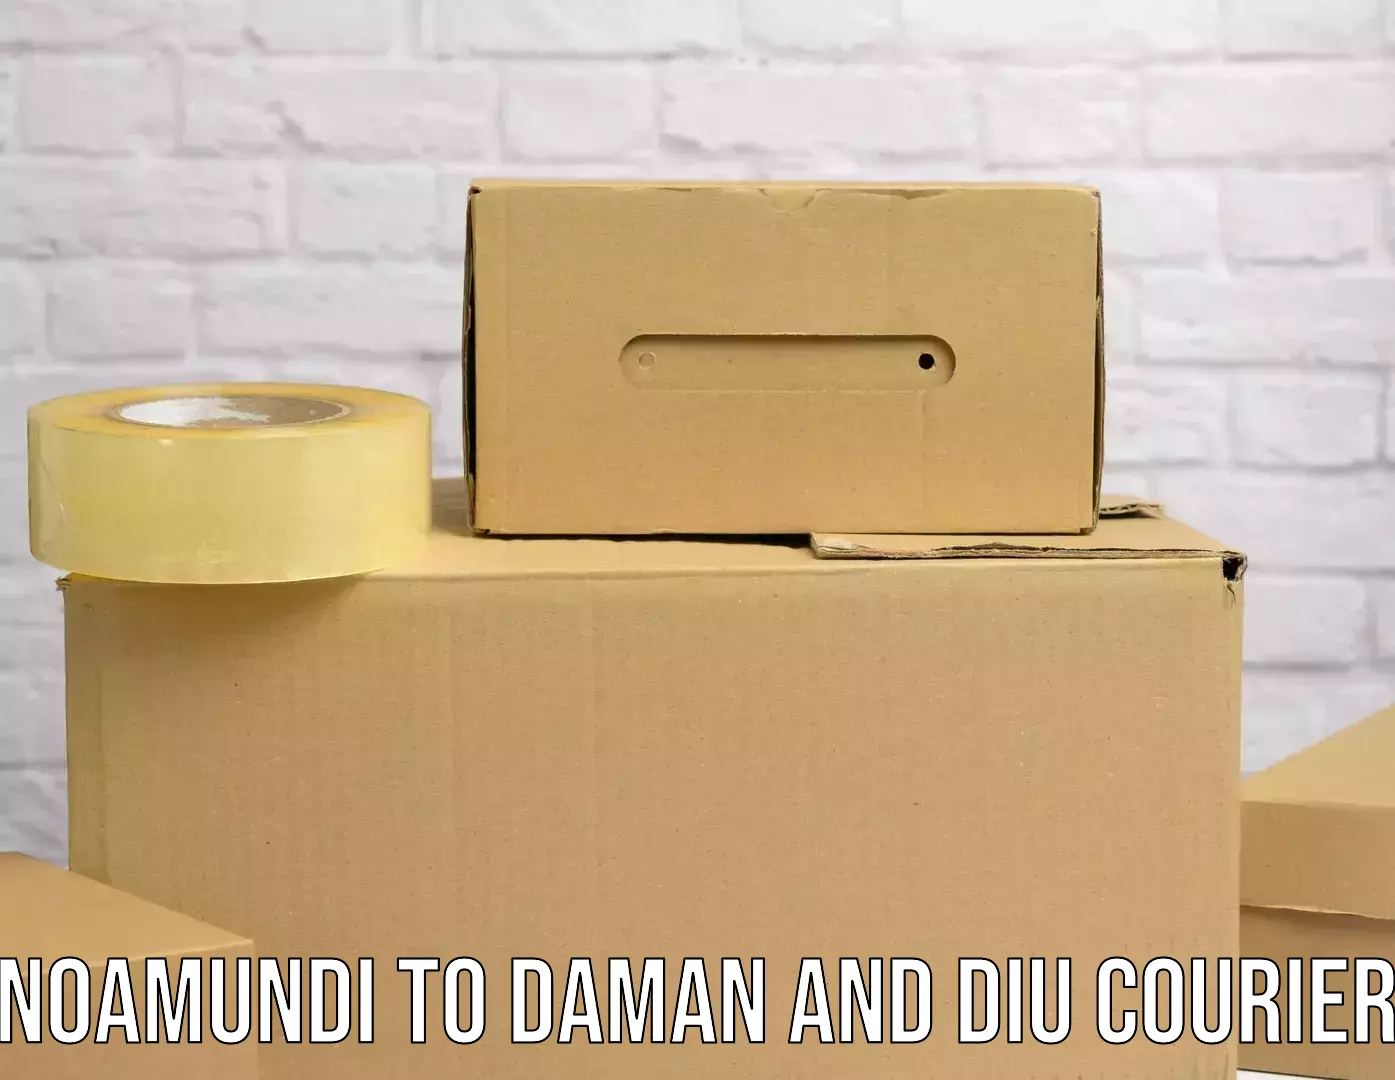 Sustainable shipping practices Noamundi to Daman and Diu